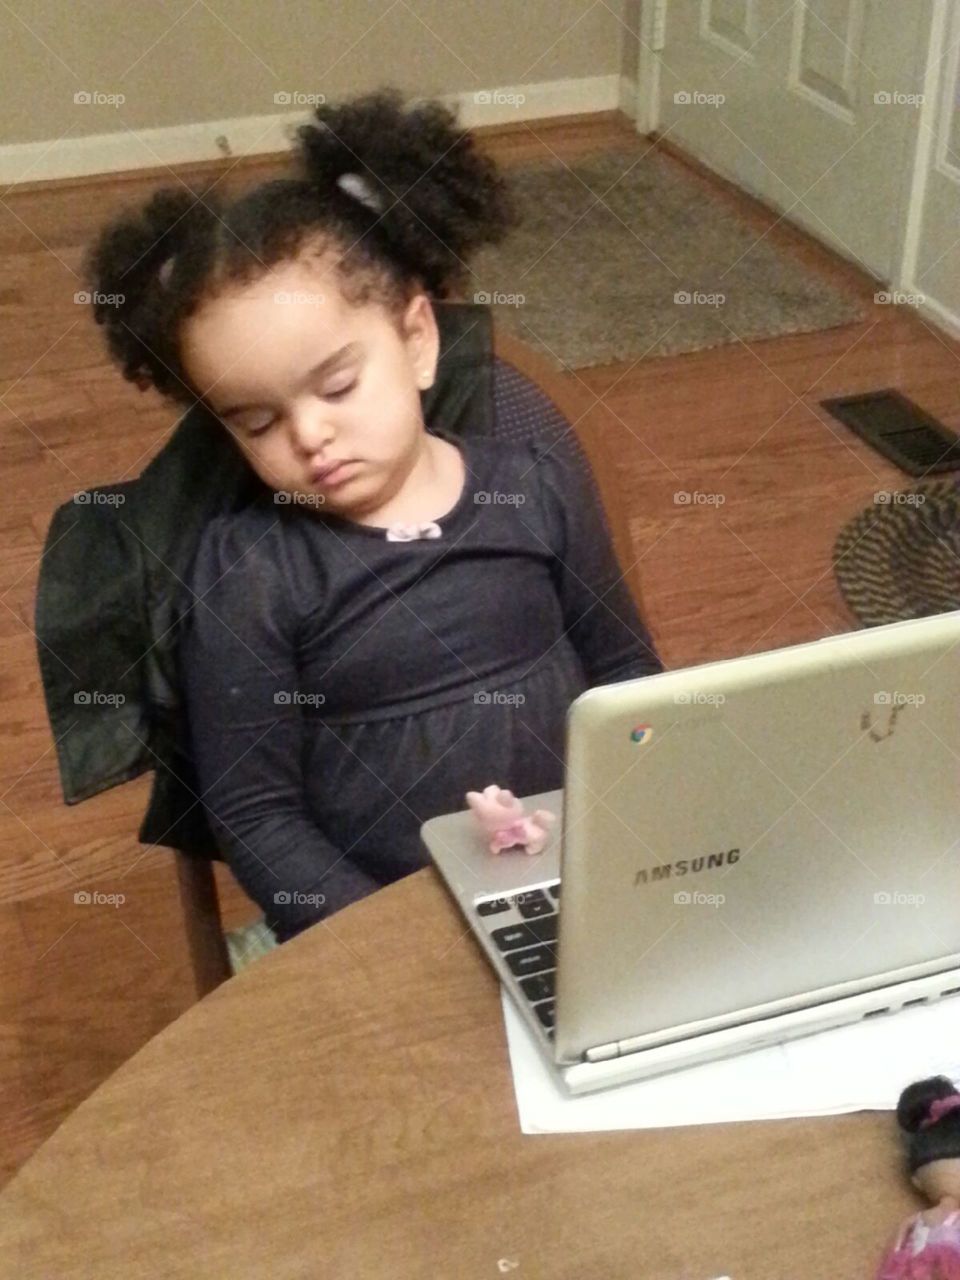 Cat nap. After a hard day at the zoo, she just couldn't last too long to watch her Dora